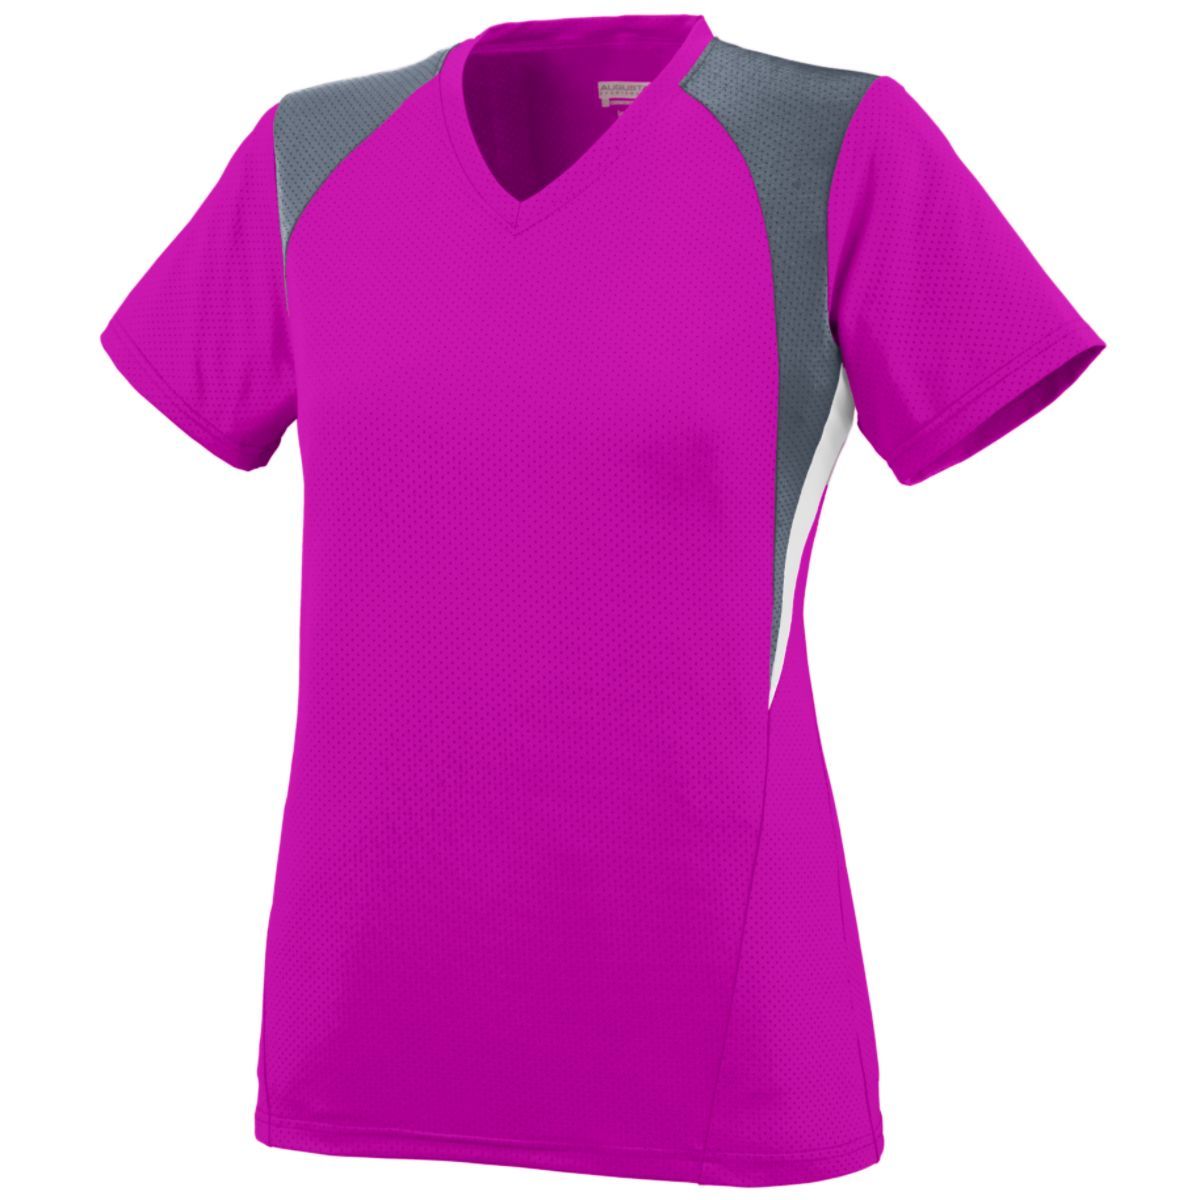 Augusta Sportswear Girls Mystic Jersey in Power Pink/Graphite/White  -Part of the Girls, Augusta-Products, Soccer, Girls-Jersey, Shirts, All-Sports-1 product lines at KanaleyCreations.com